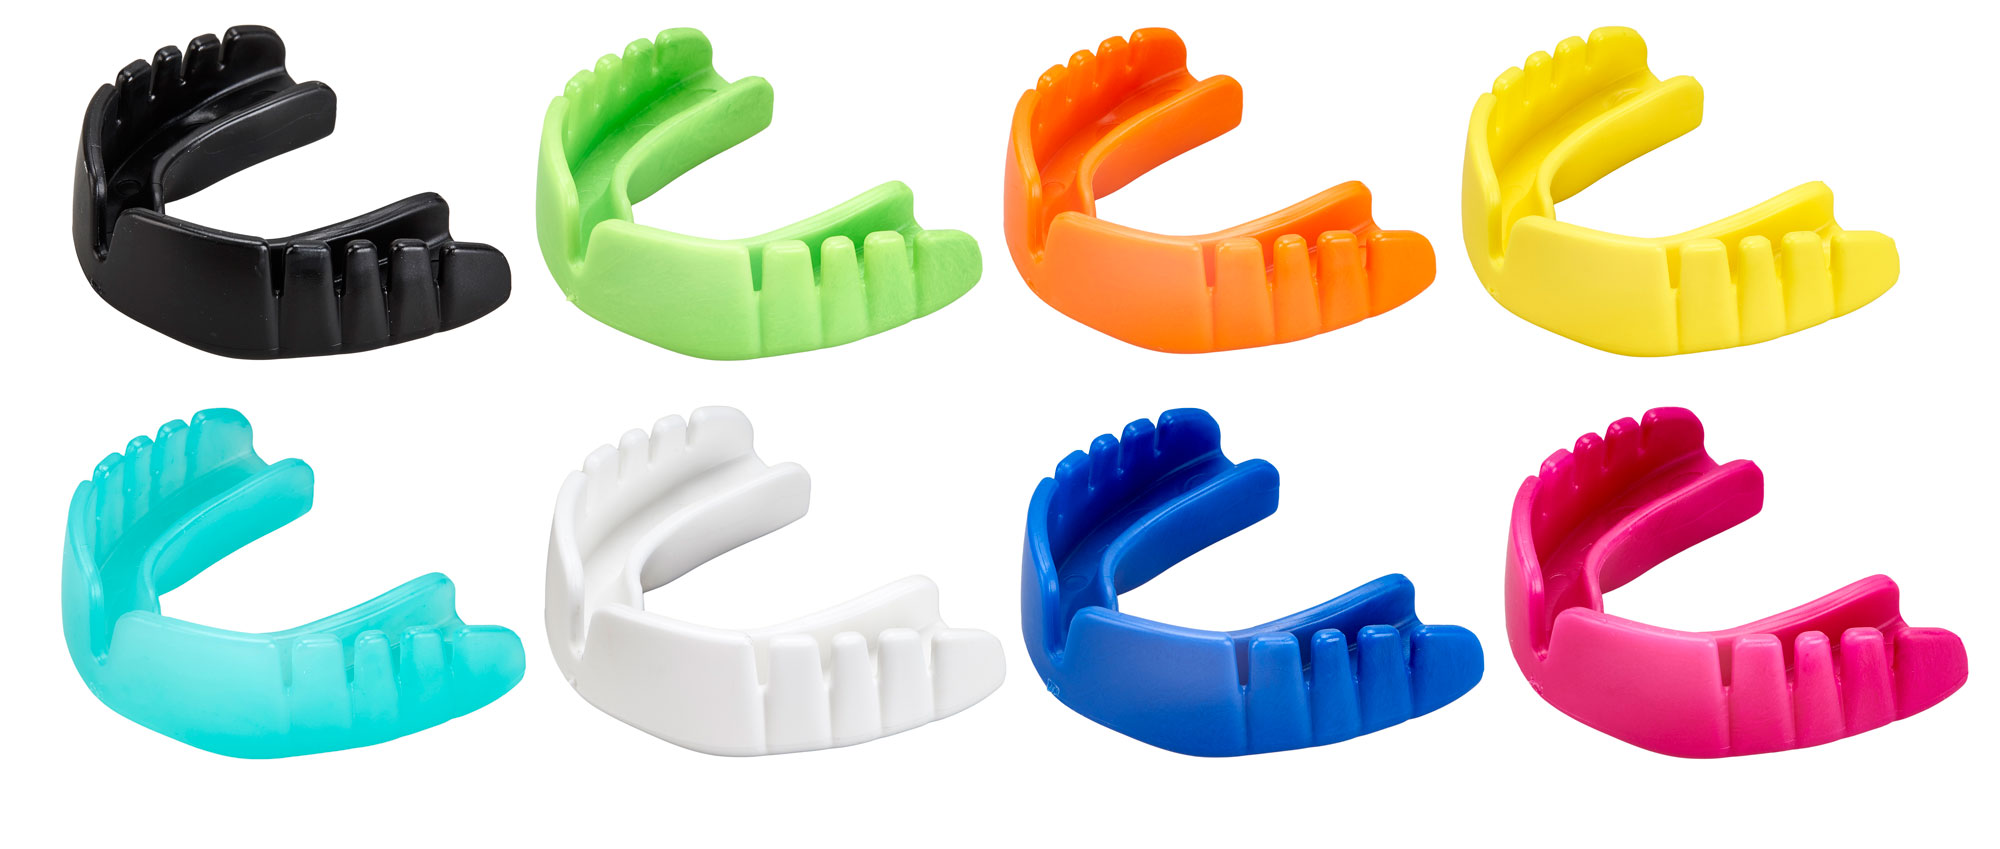 OPRO Mouthguard Snap-Fit Senior